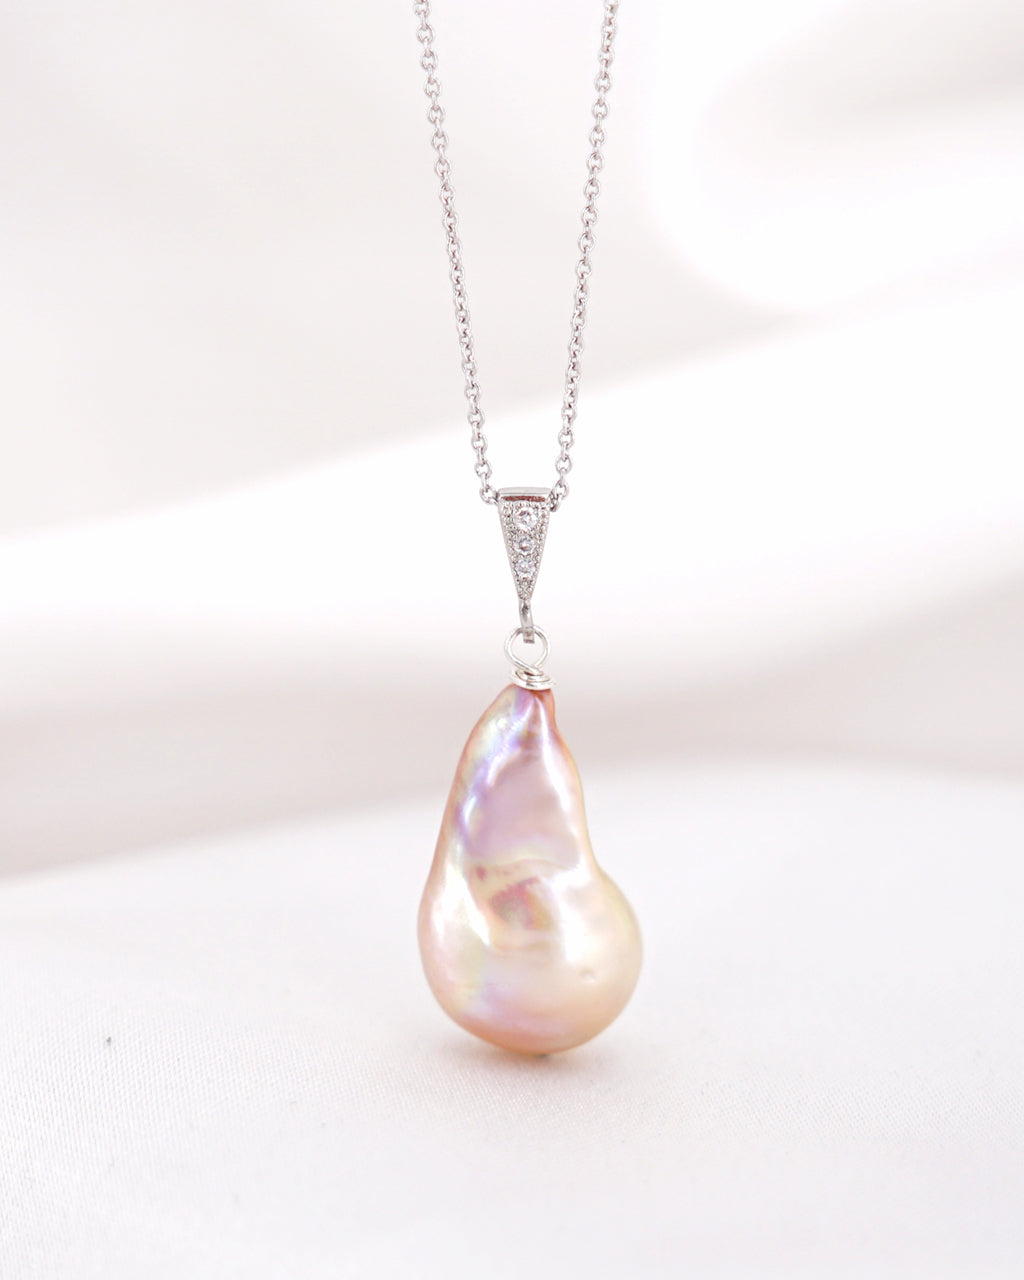 Baroque Pearl Pendant Necklace - Simple - Wedding Bridal Jewelry for Brides and Bridesmaids | Singapore